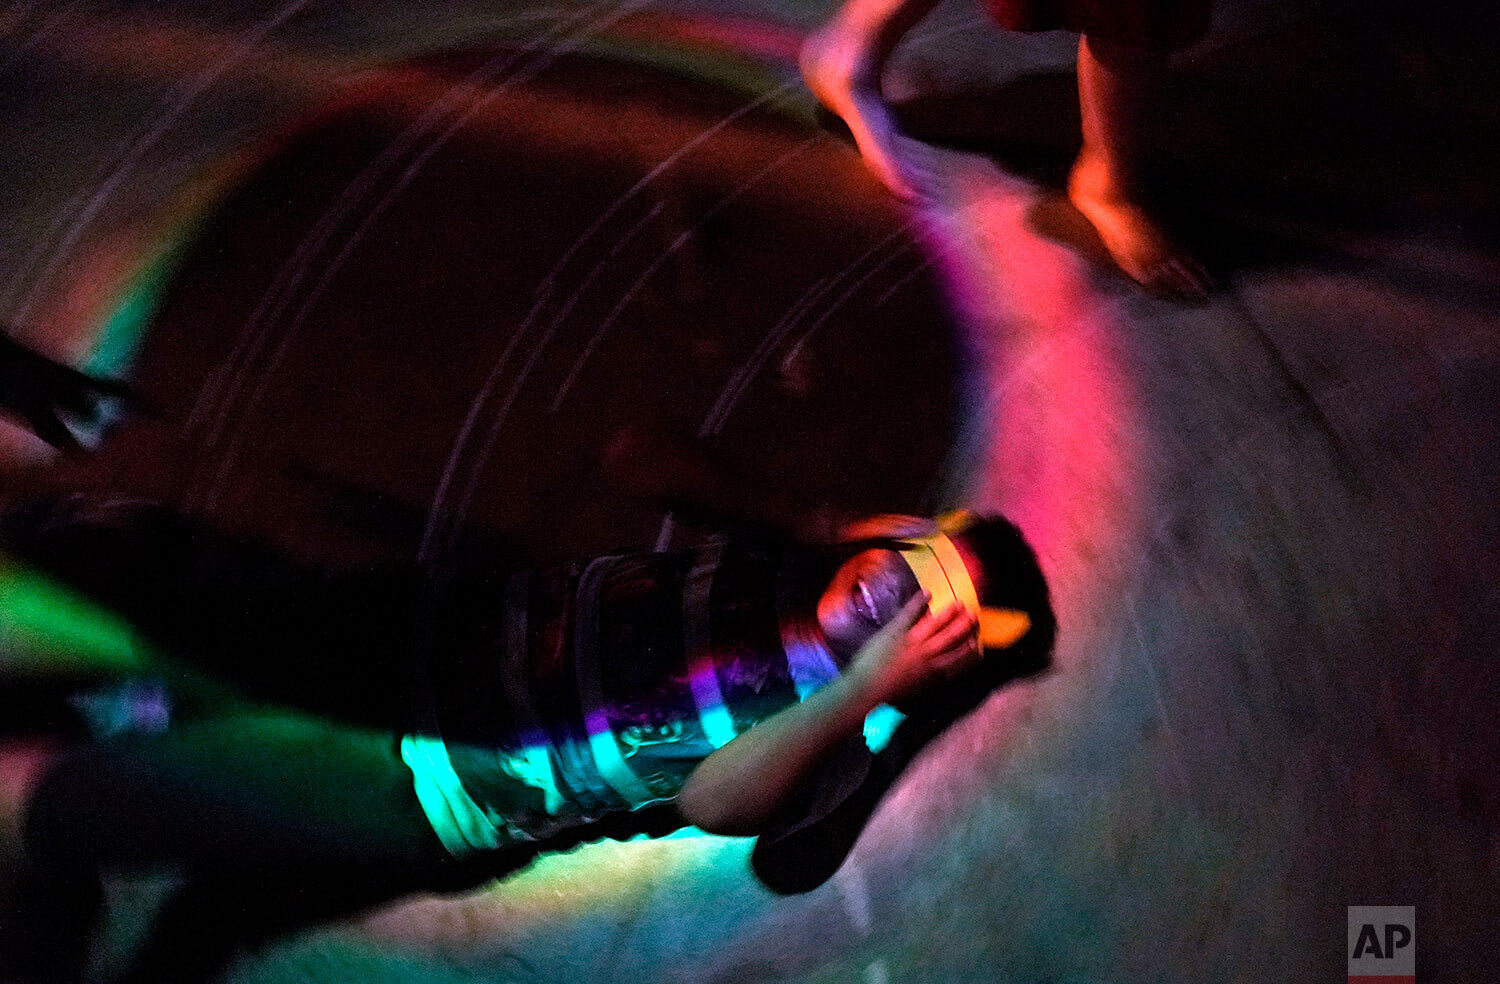  Byron Xol, an immigrant from Guatemala, lies on the floor in a make-shift disco ballroom in Buda, Texas, during his birthday party on June 23, 2019. Byron was separated from his father, David Xol-Cholom, in May 2018, during the Trump administration'